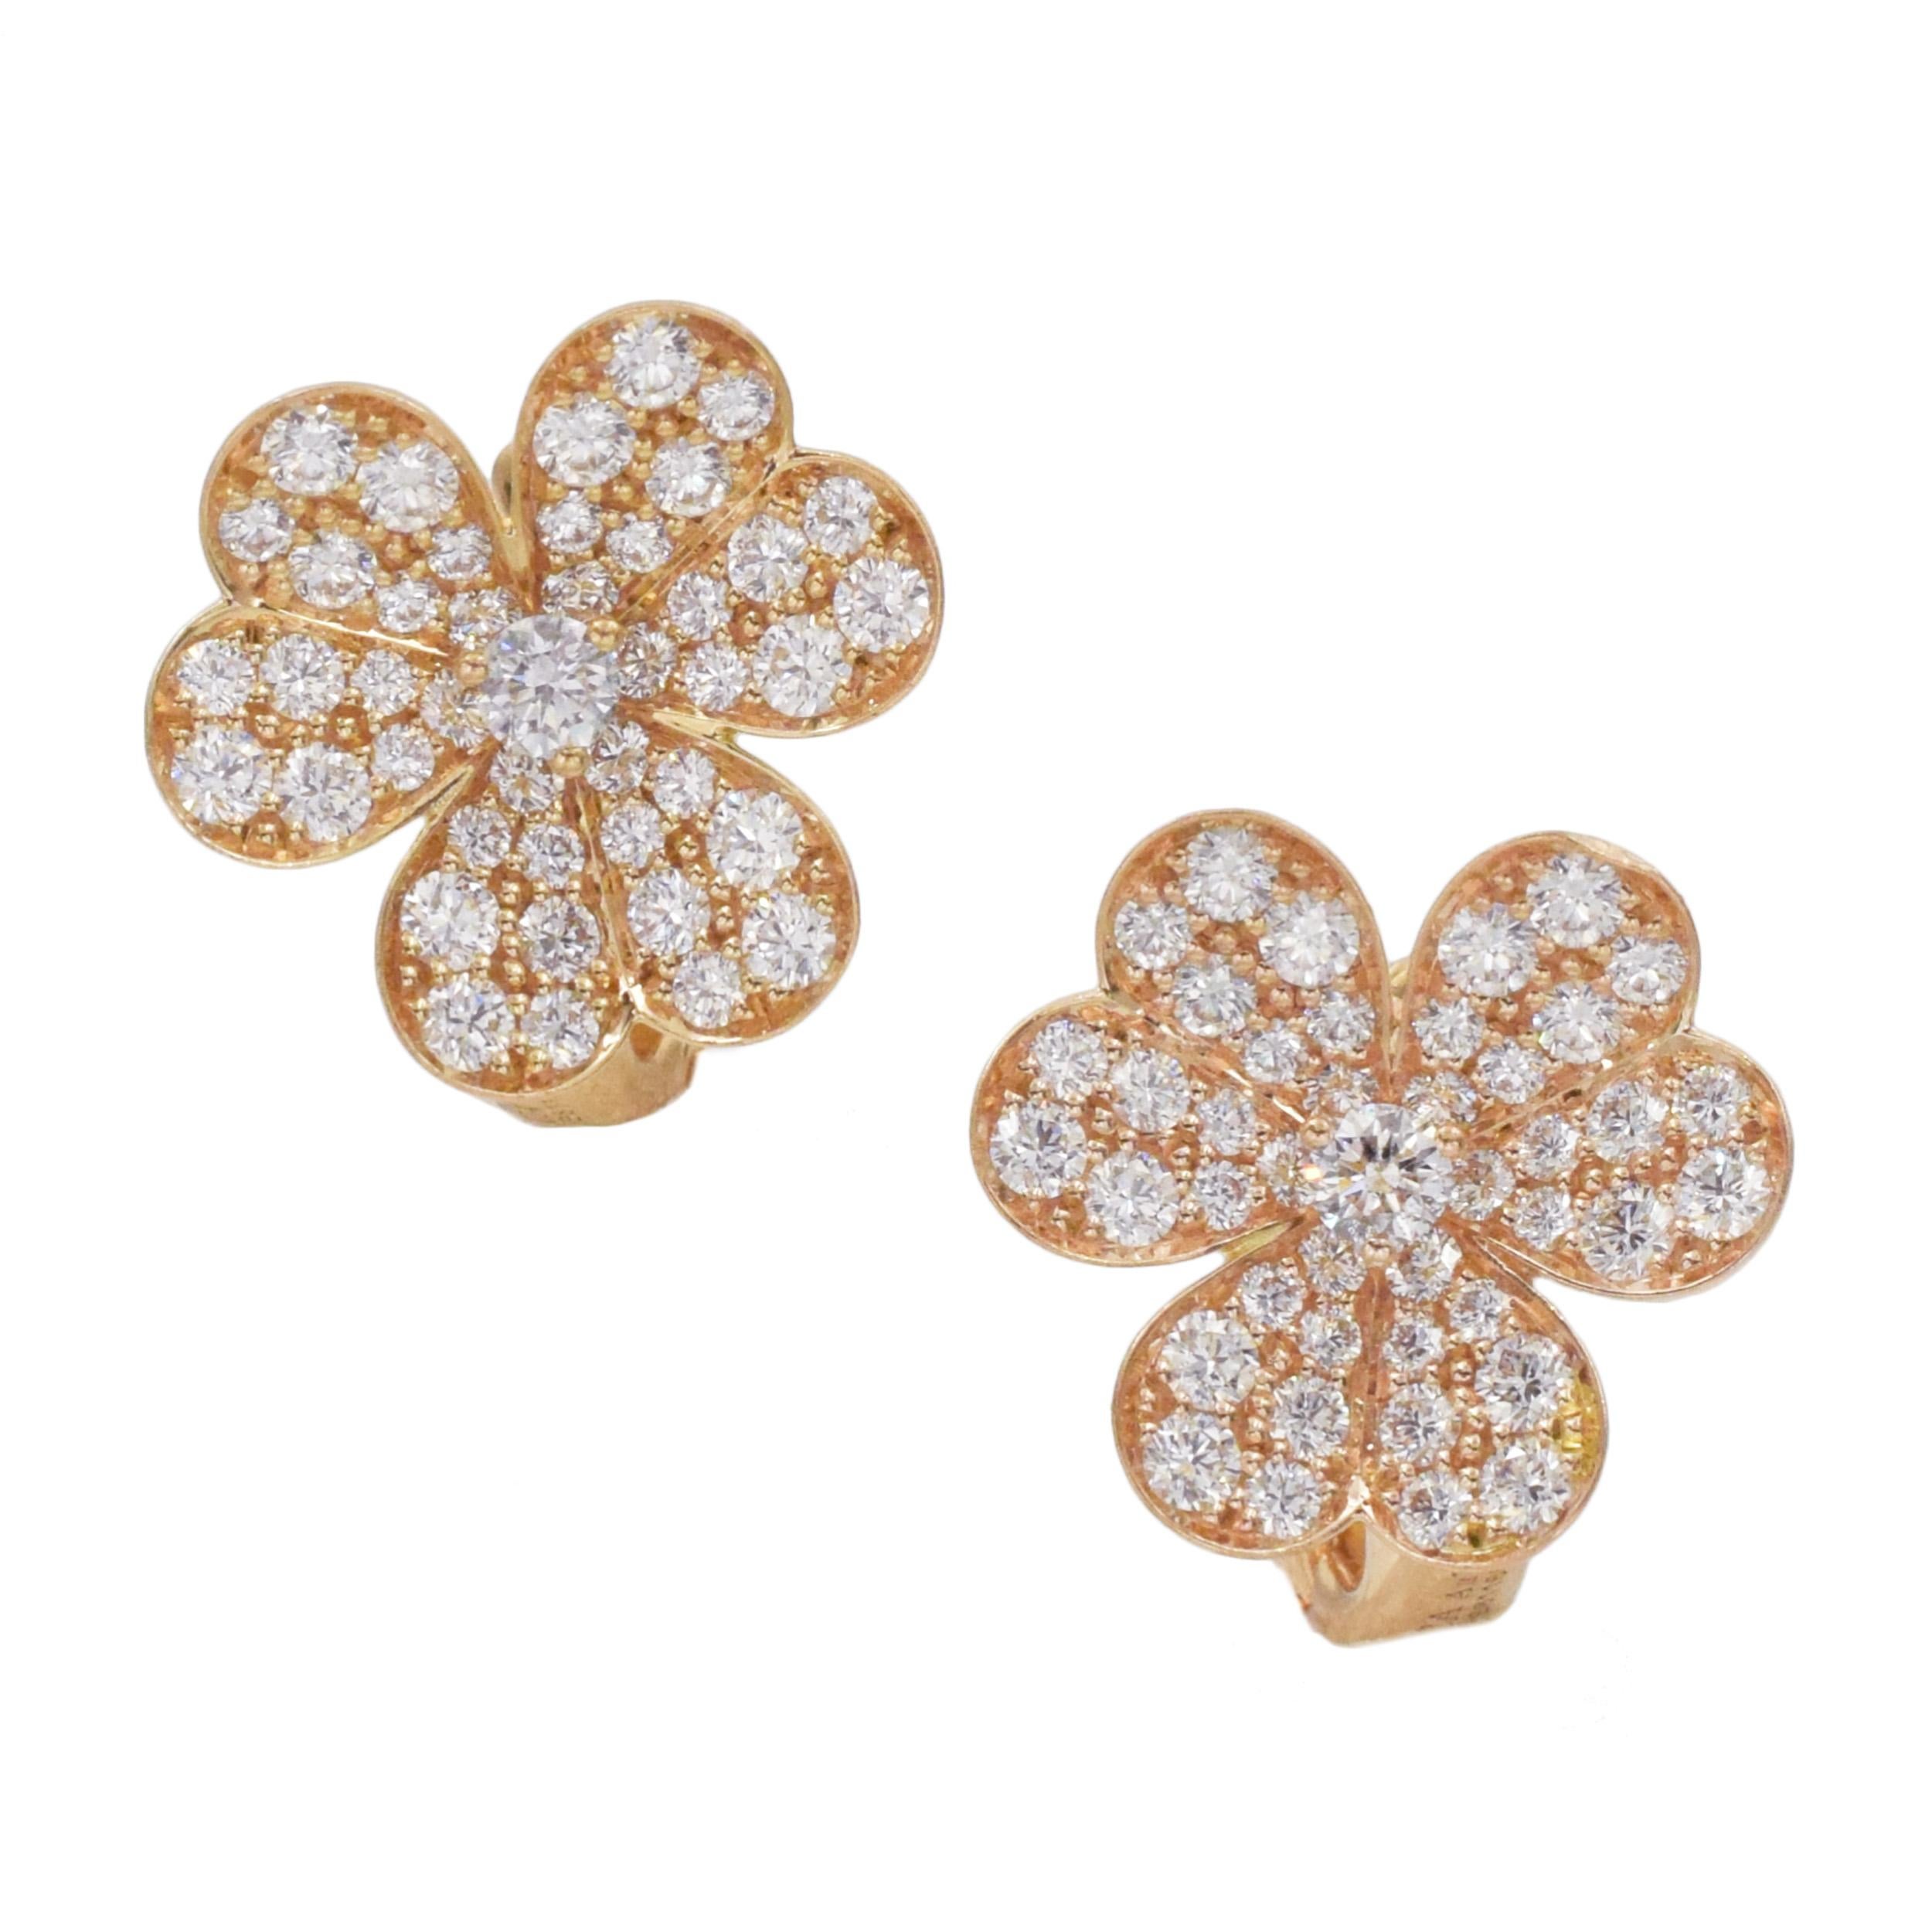 Van Cleef & Arpels 'Frivole' Diamond and Rose Gold Earrings. This pair of earrings
has 2 flower motifs with round diamonds weighing approximately 1.65ct (Color: E/F, Clarity:
VS) all set in 18k rose gold. Earrings has post with omega backs. Signed